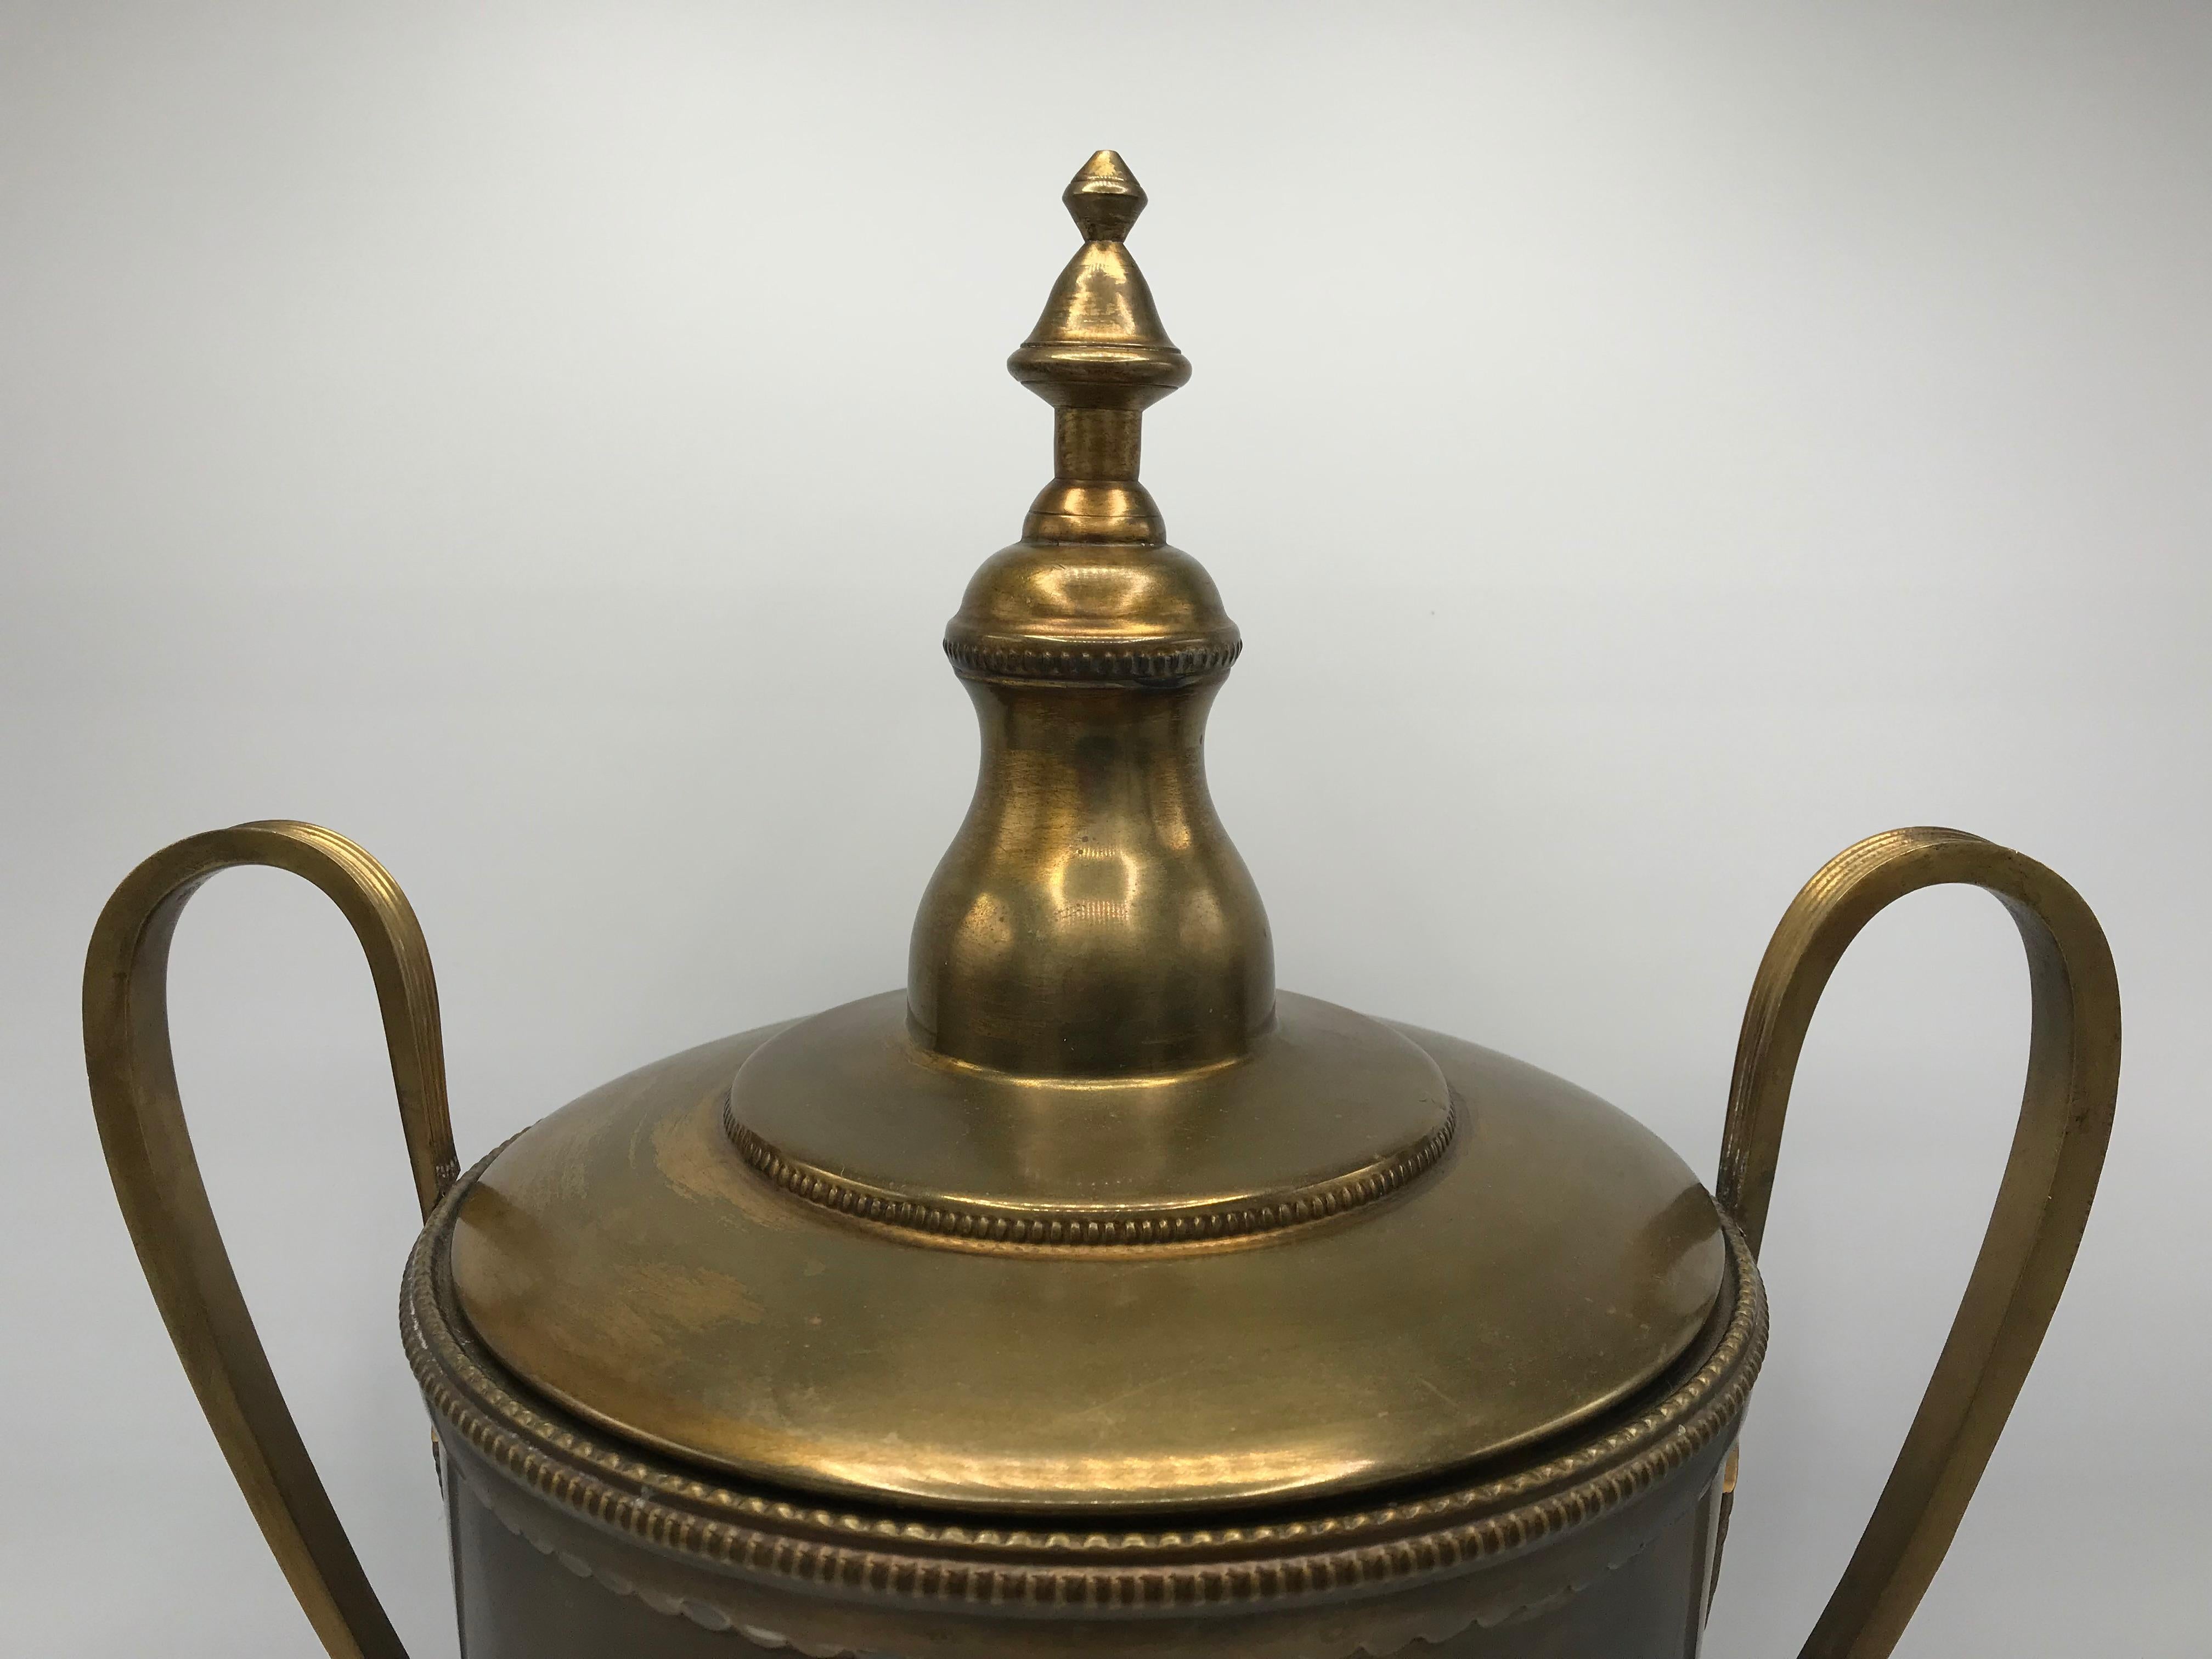 Offered is a gorgeous, 1980s Italian brushed-brass lidded urn. The piece has amazing craftsmanship and attention to detail, with its allover grape motif, scalloped edgings, finials, and fine lines. Heavy, weighs 7.5lbs.